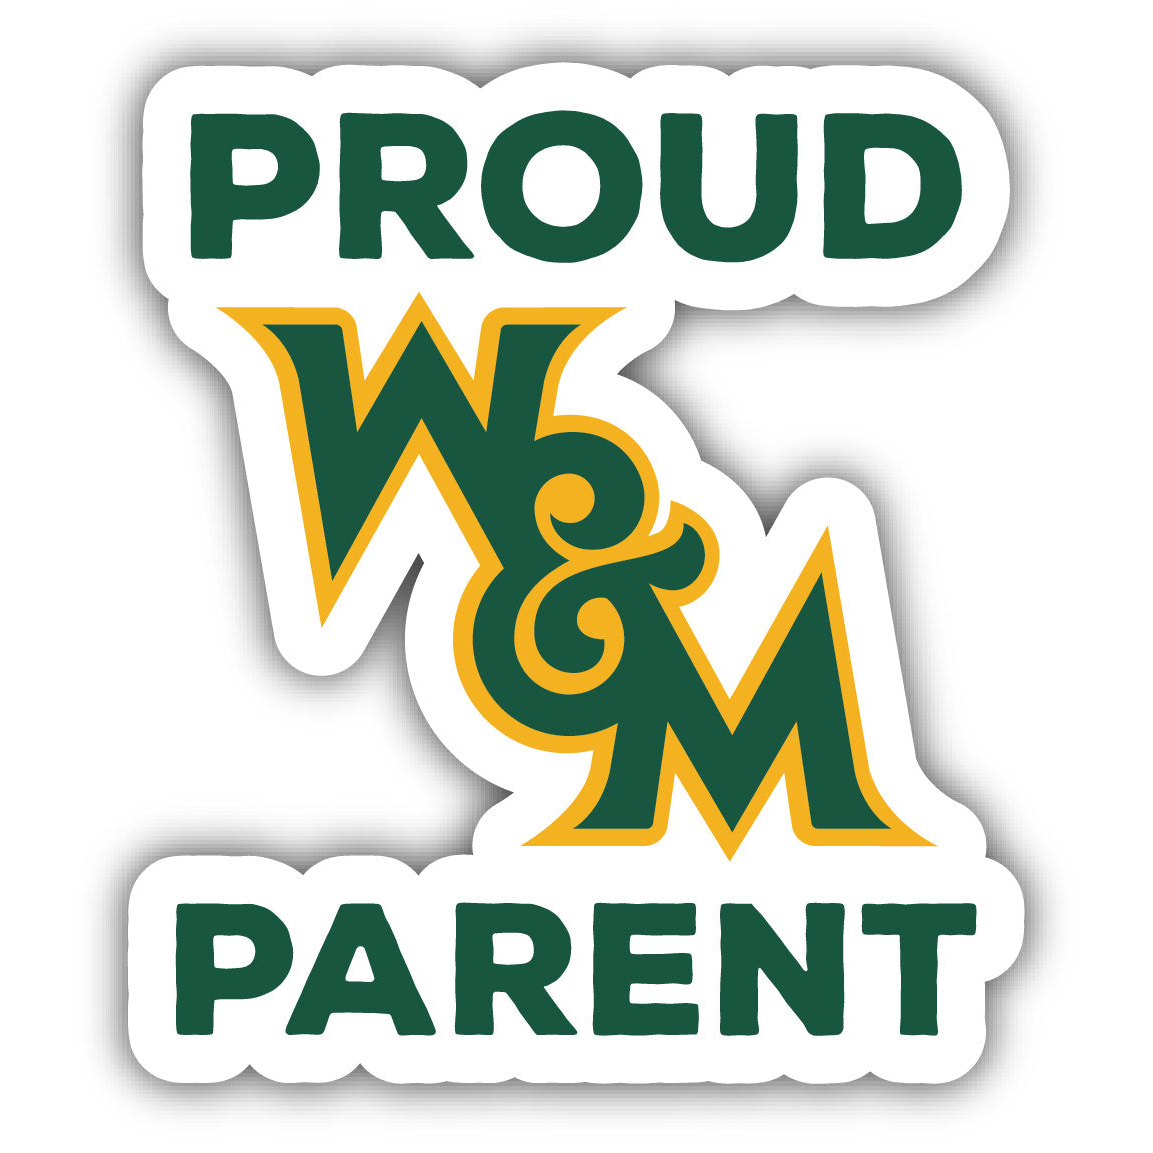 William And Mary Proud Parent 4 Sticker - (4 Pack)